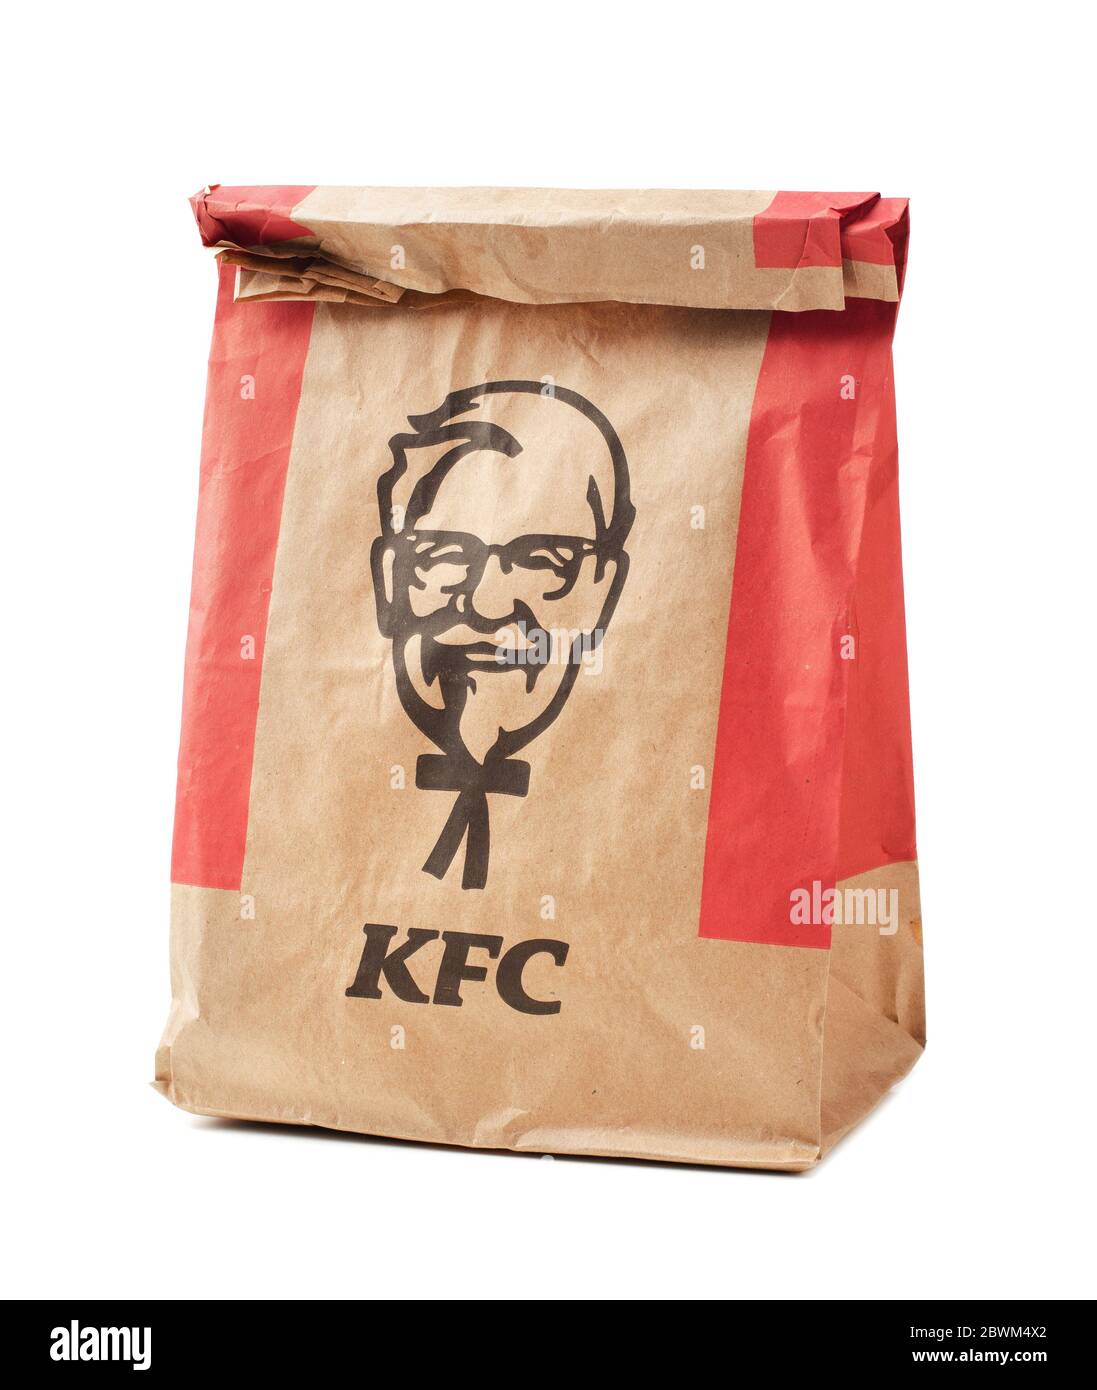 Moscow, Russia. 12.26.2019. Kentucky Fried Chicken paper bag isolated on a white background. KFC is a fast food restaurant chain headquartered in Unit Stock Photo